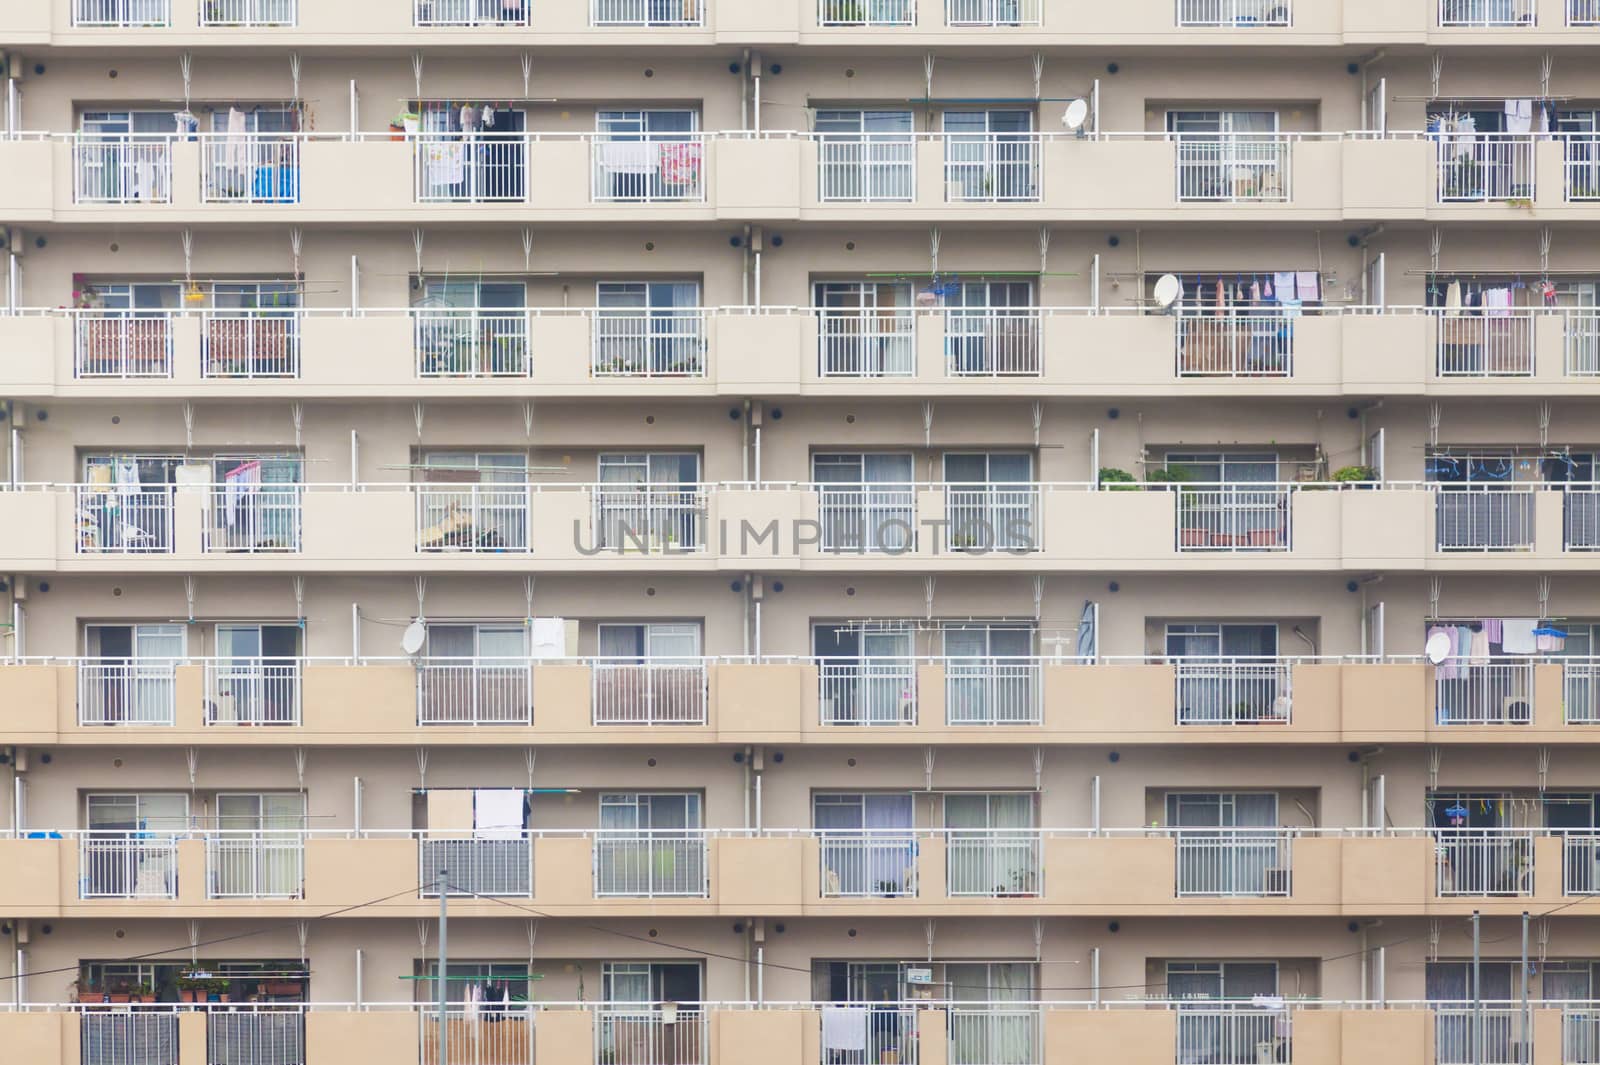 Facade of an apartment building in Japan by ymgerman